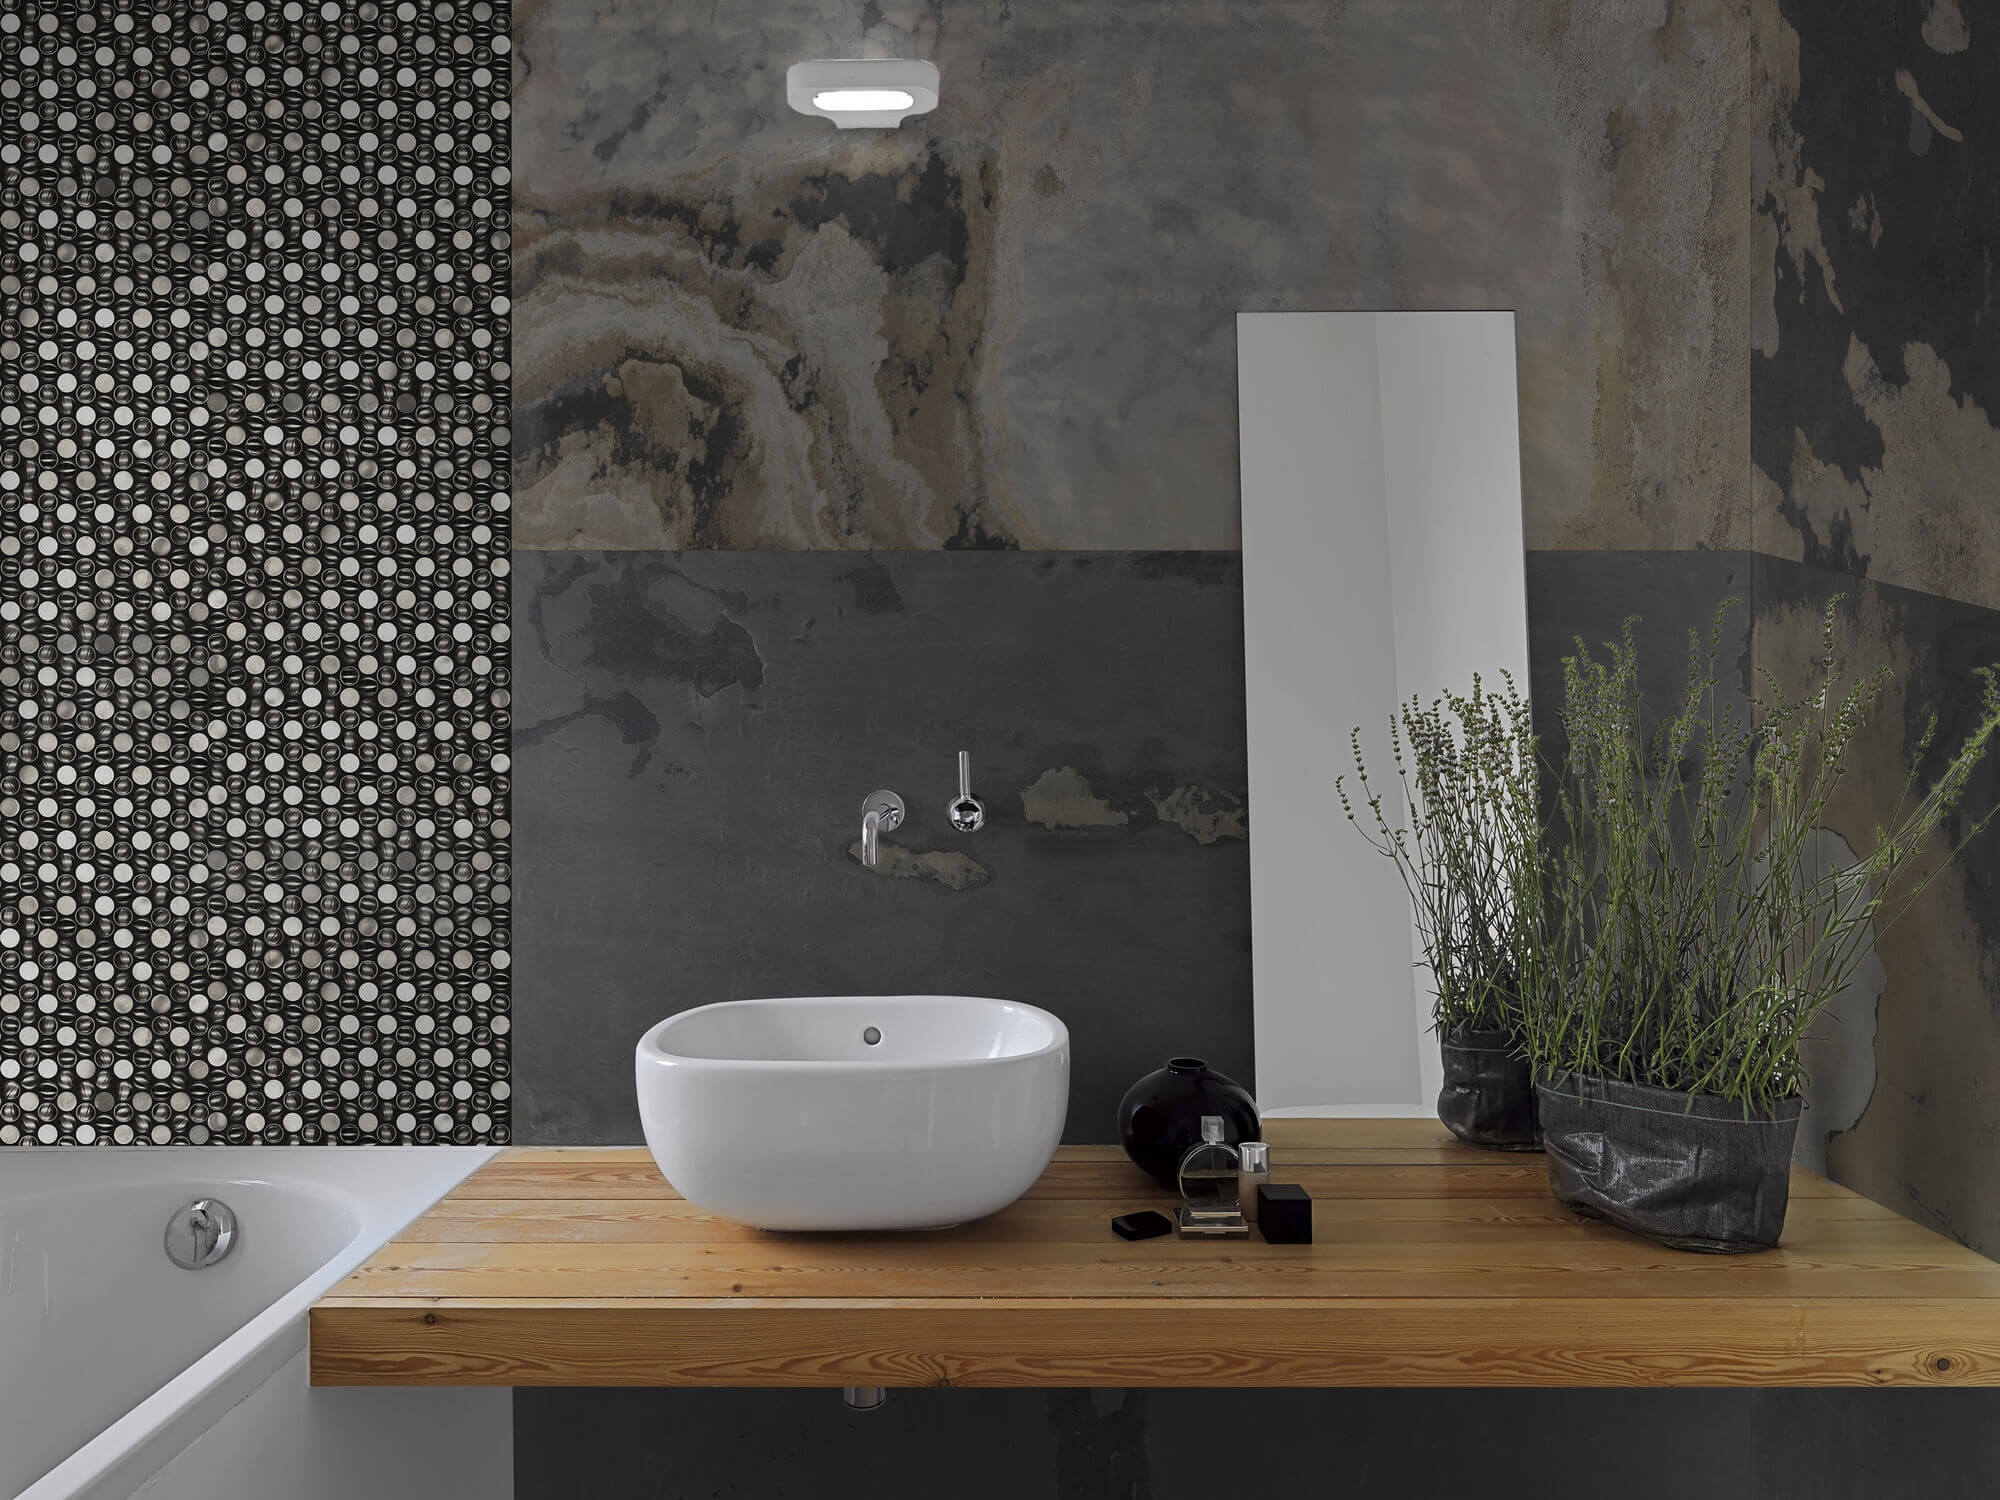 ambiente fs6010 - Bathrooms with natural stone